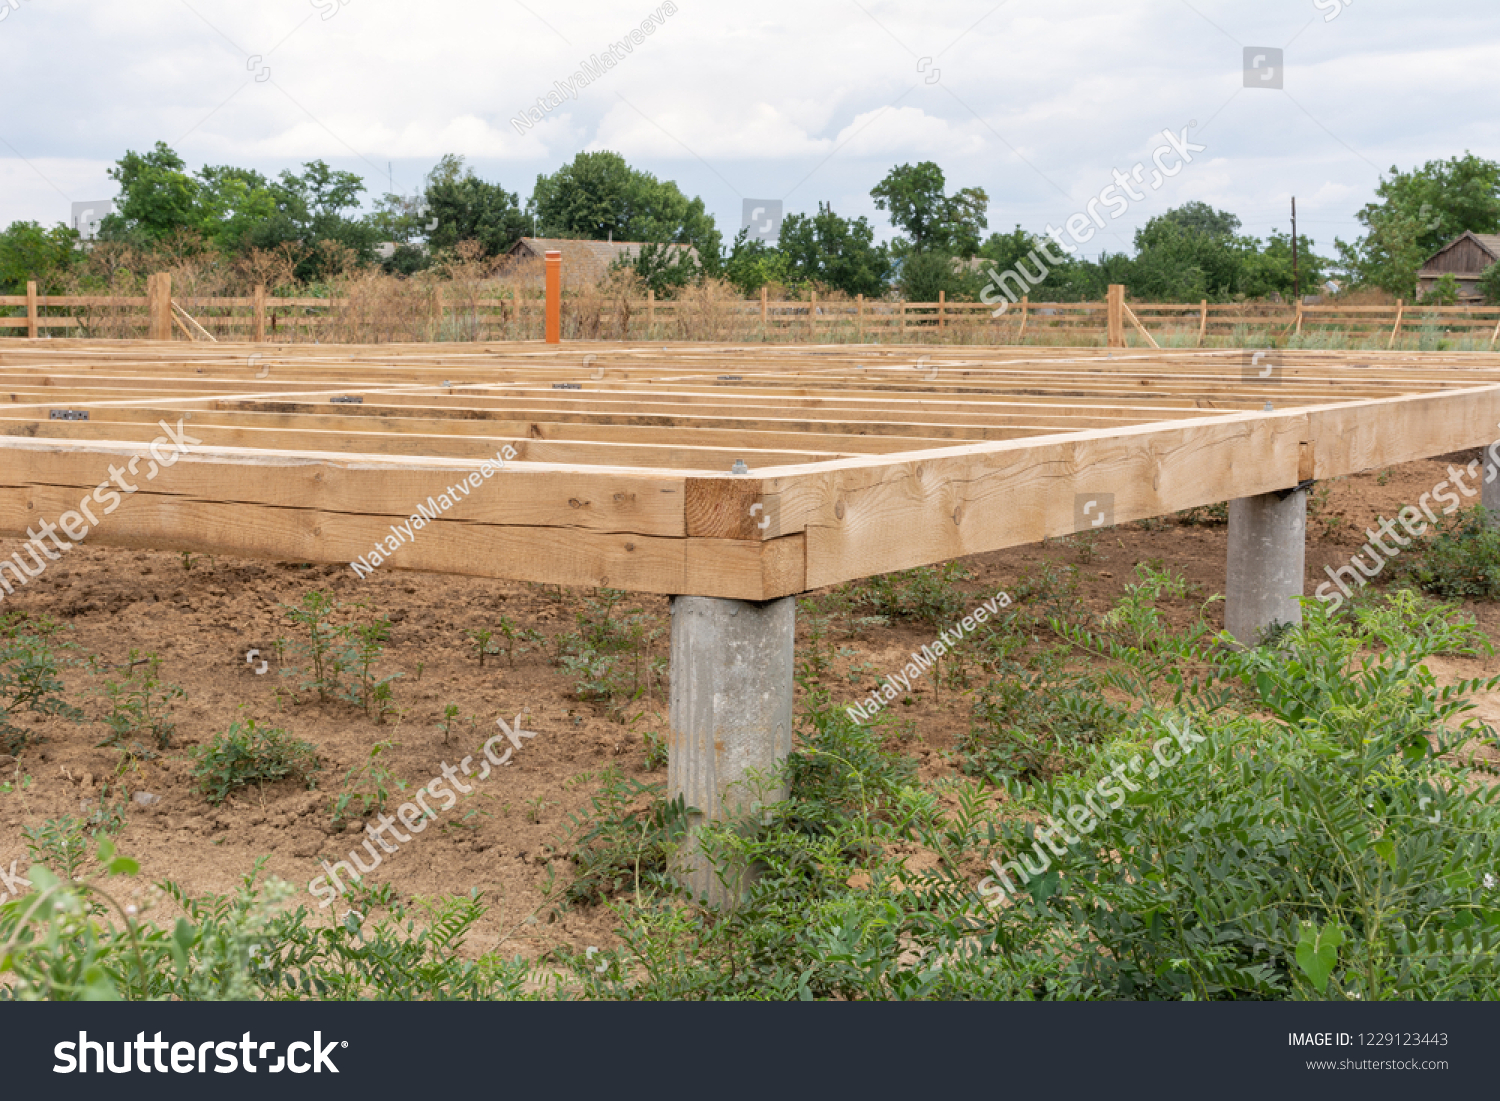 On pile foundations support the floor of a frame house #1229123443